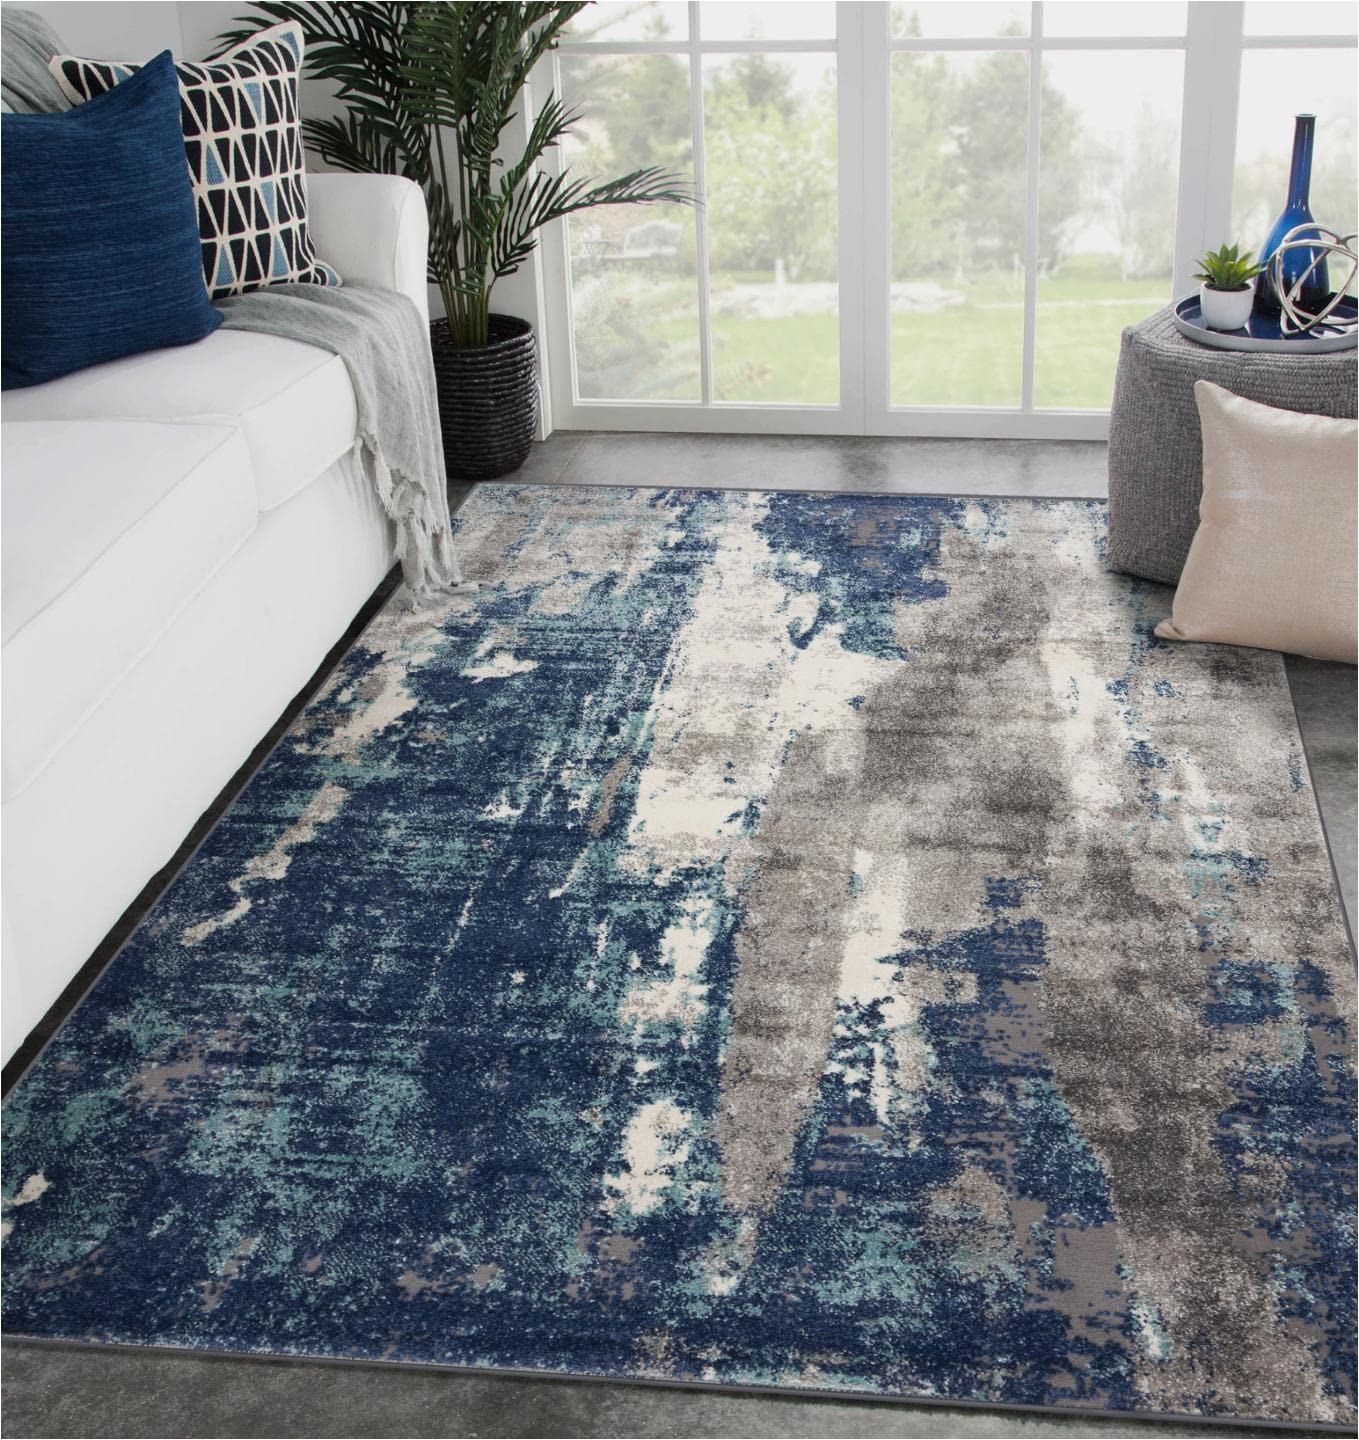 Light Blue and Gray area Rug Amazon.com: Luxe Weavers Modern area Rugs with Abstract Patterns …